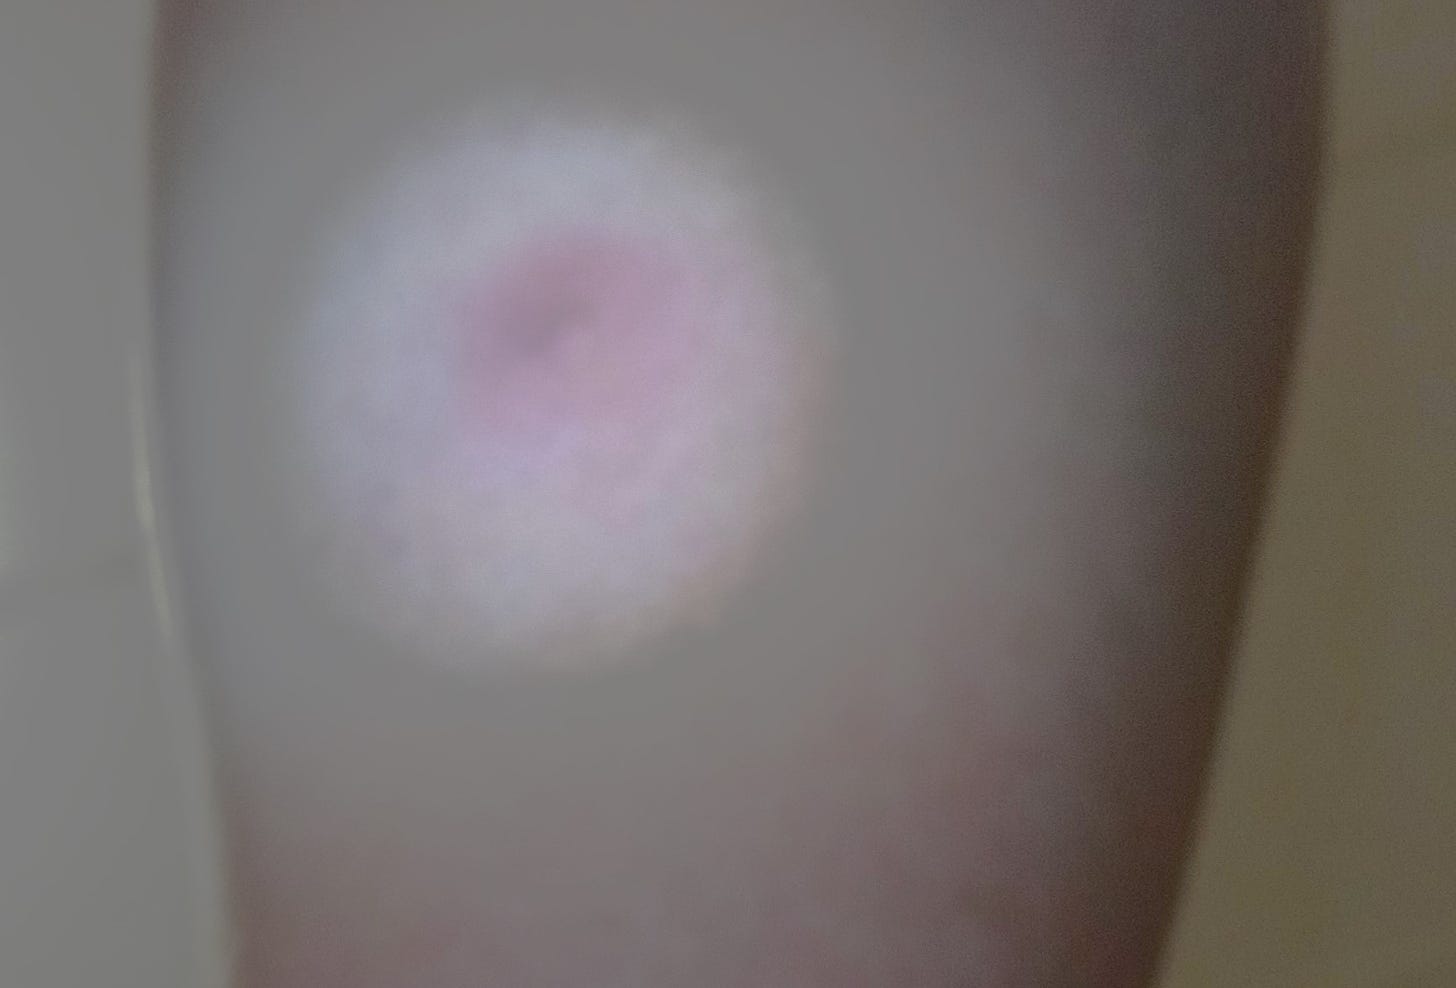 A one inch diameter sore with an insect bite at the center. Photo property of author.